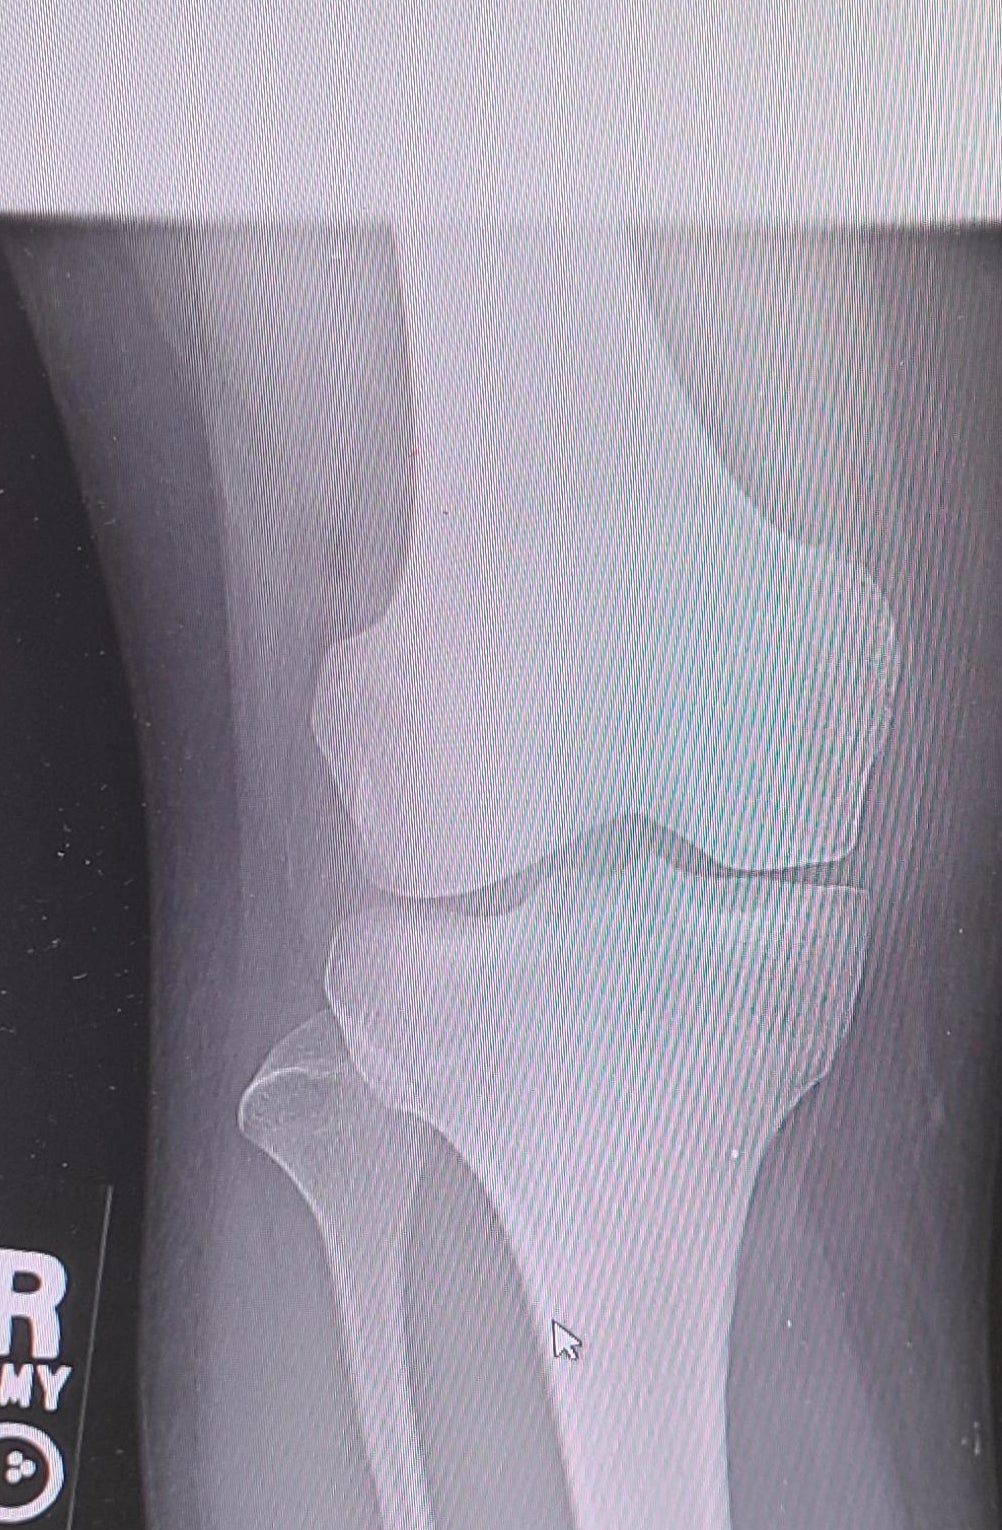 X-ray of a human knee joint with cursor arrow pointing to the area between femur and tibia